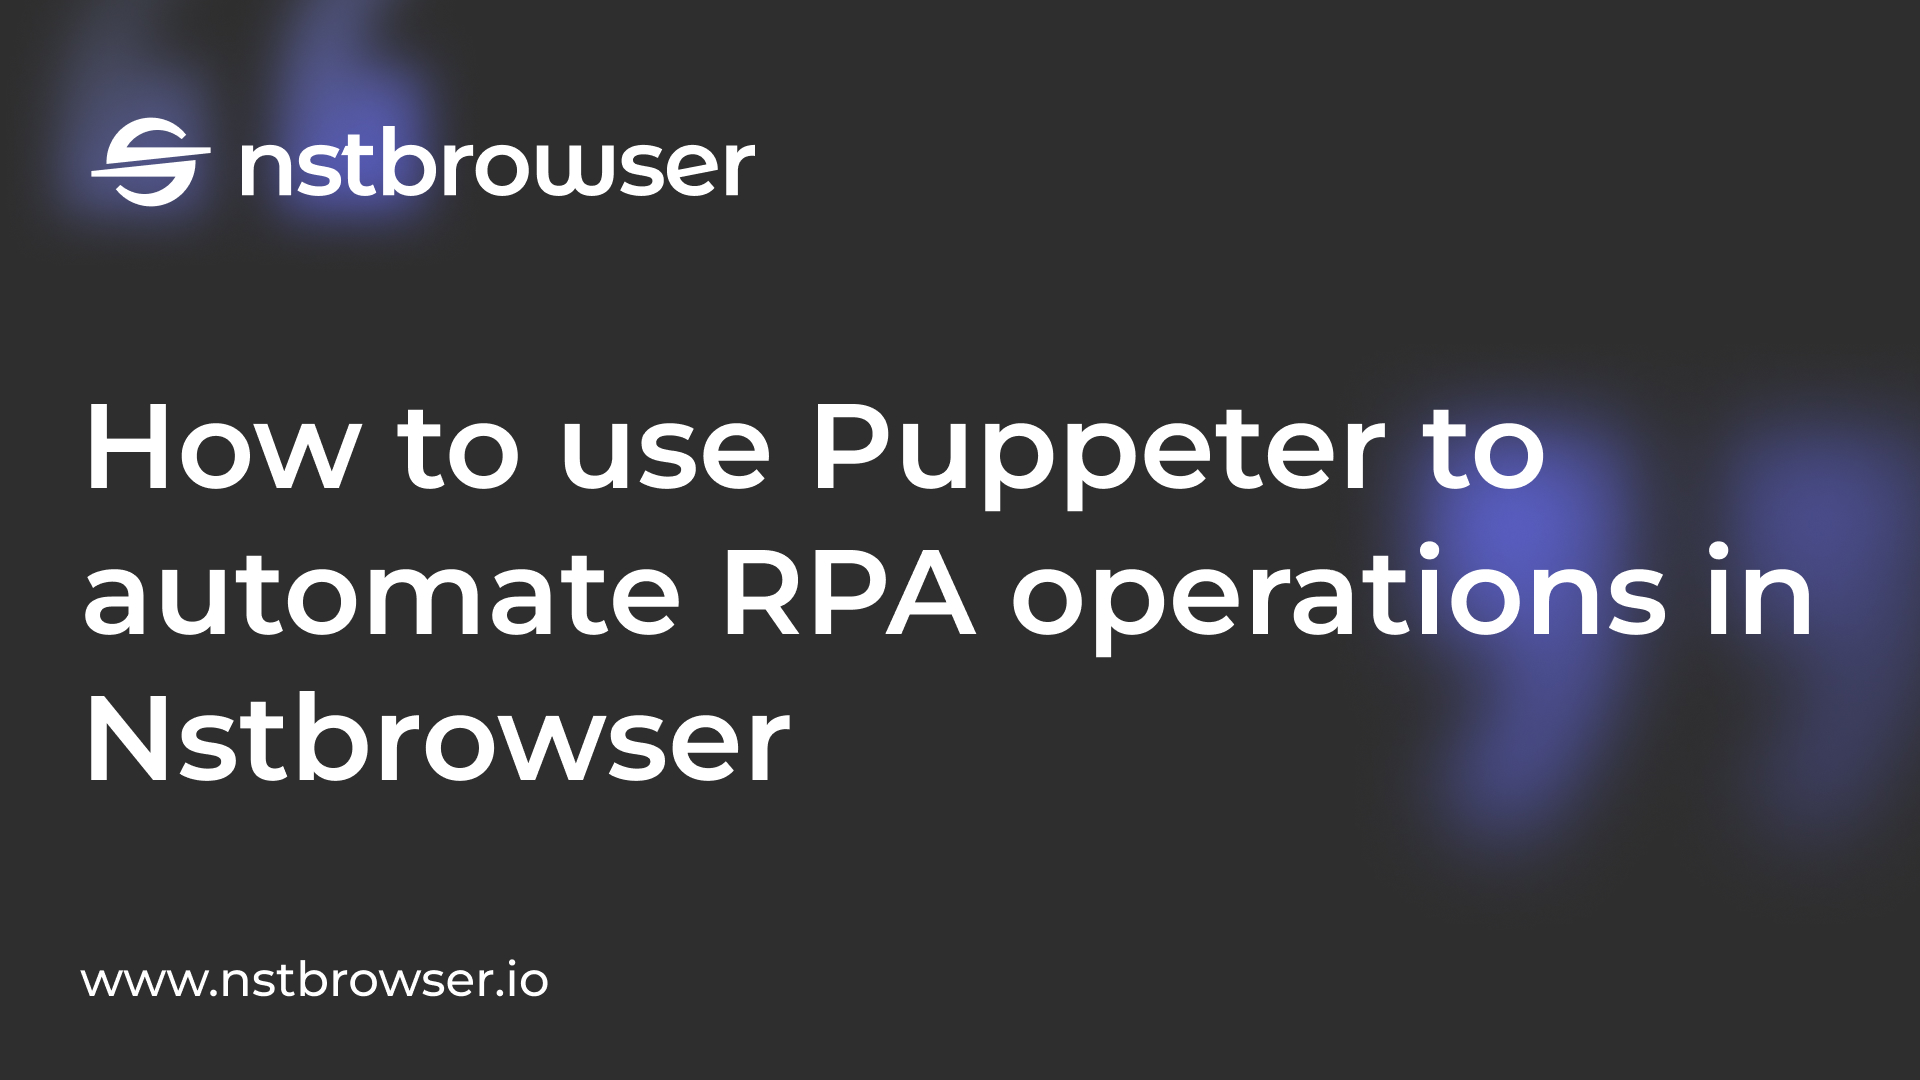 Puppeter to automate RPA